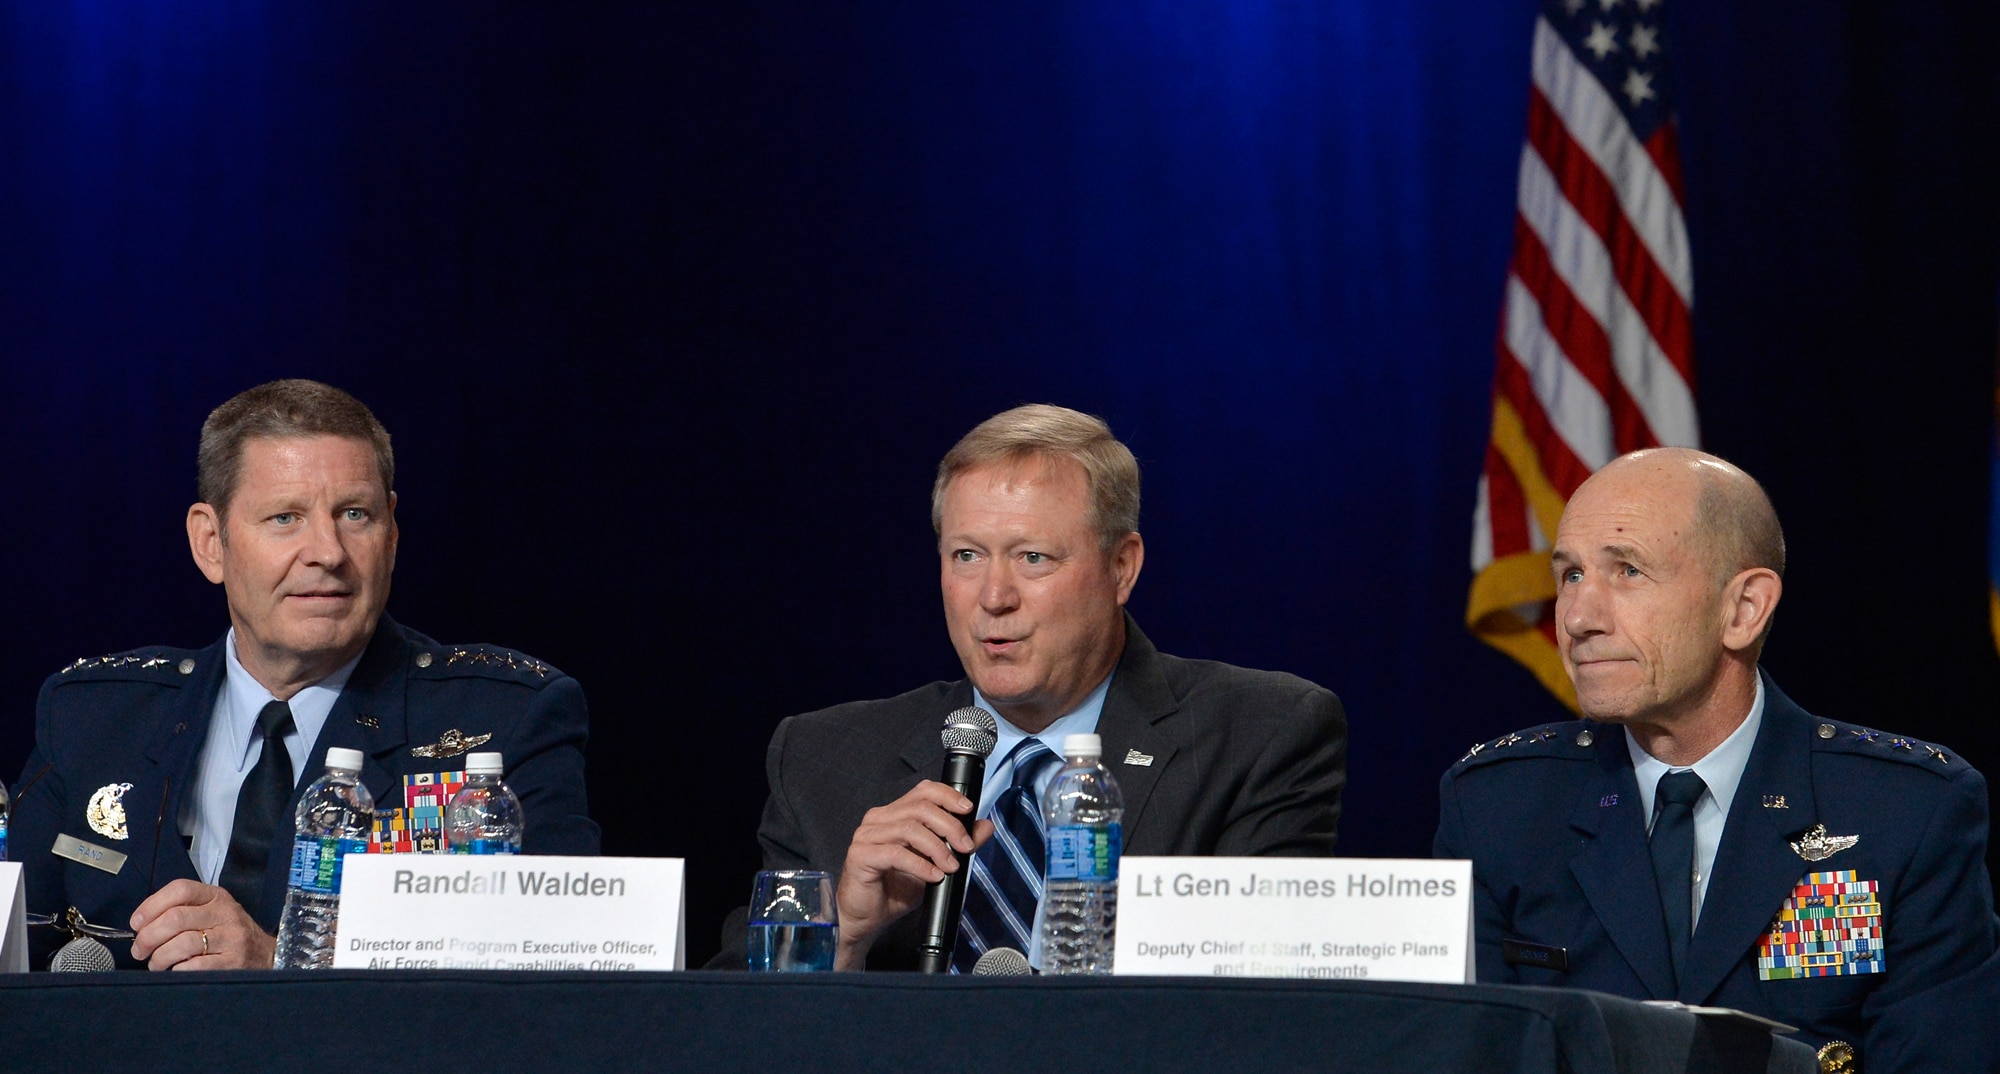 Randall G. Walden, the director and program executive officer of the Air Force Rapid Capabilities Office, answers a question during a B-21 panel at the Air Force Association's Air, Space and Cyber Conference in National Harbor, Md., Sept. 19, 2016. Gen. Robin Rand, the Air Force Global Strike Command commander,  and Lt. Gen. James Holmes, the deputy chief of staff, strategic plans and requirements, were also members of the panel. (U.S. Air Force photo/Staff Sgt. Whitney Stanfield)
